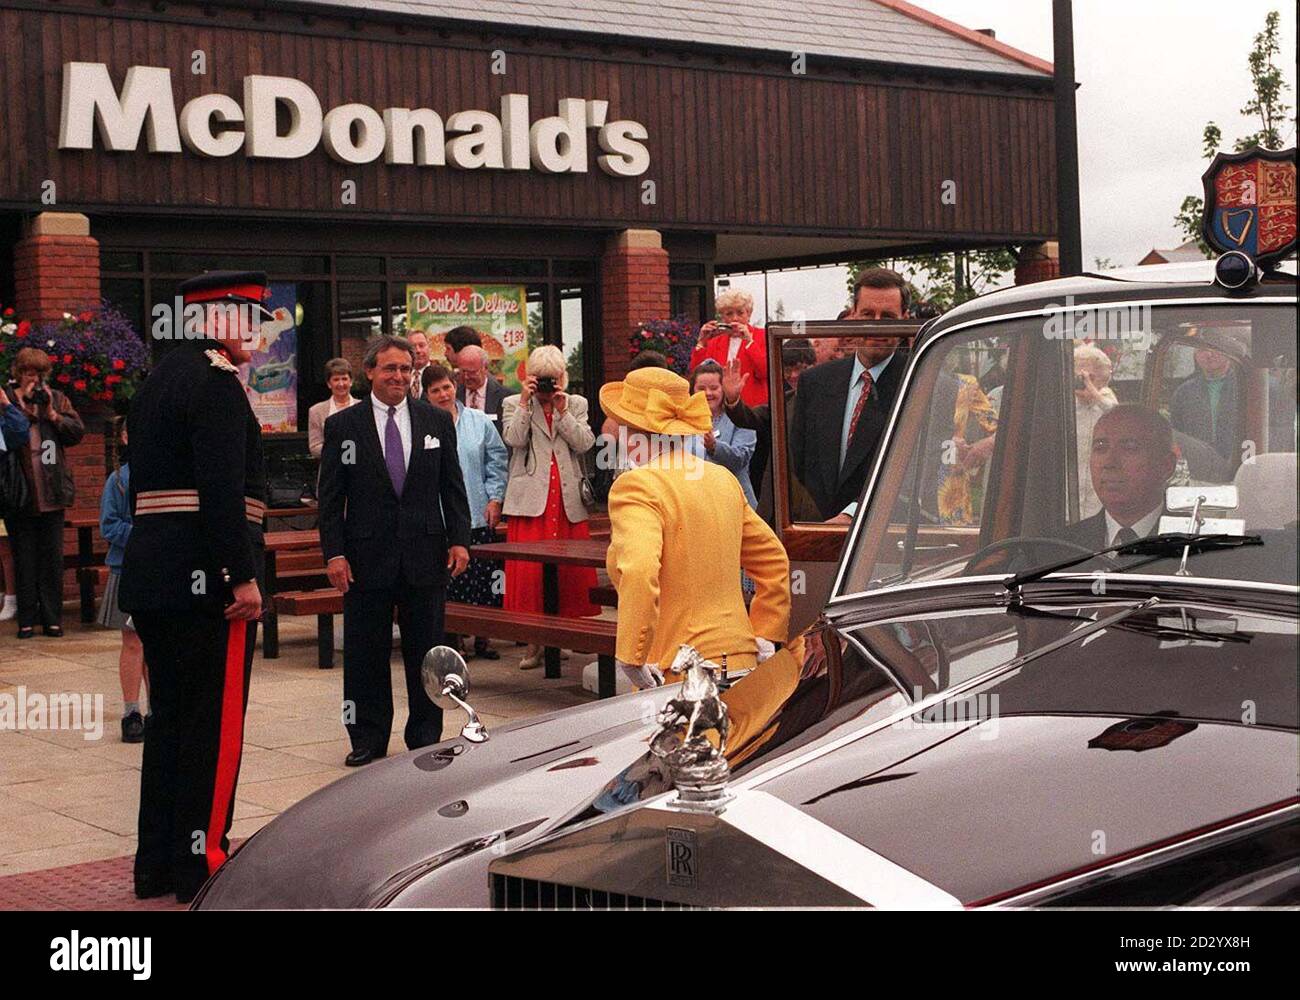 The Queen arrives at the McDonalds restaurant at the Chesire Oaks Designer Outlet Village in Ellesmere Port today (Friday). Photo by Liverpool Echo/ROTA. See PA Story ROYAL Queen. Stock Photo